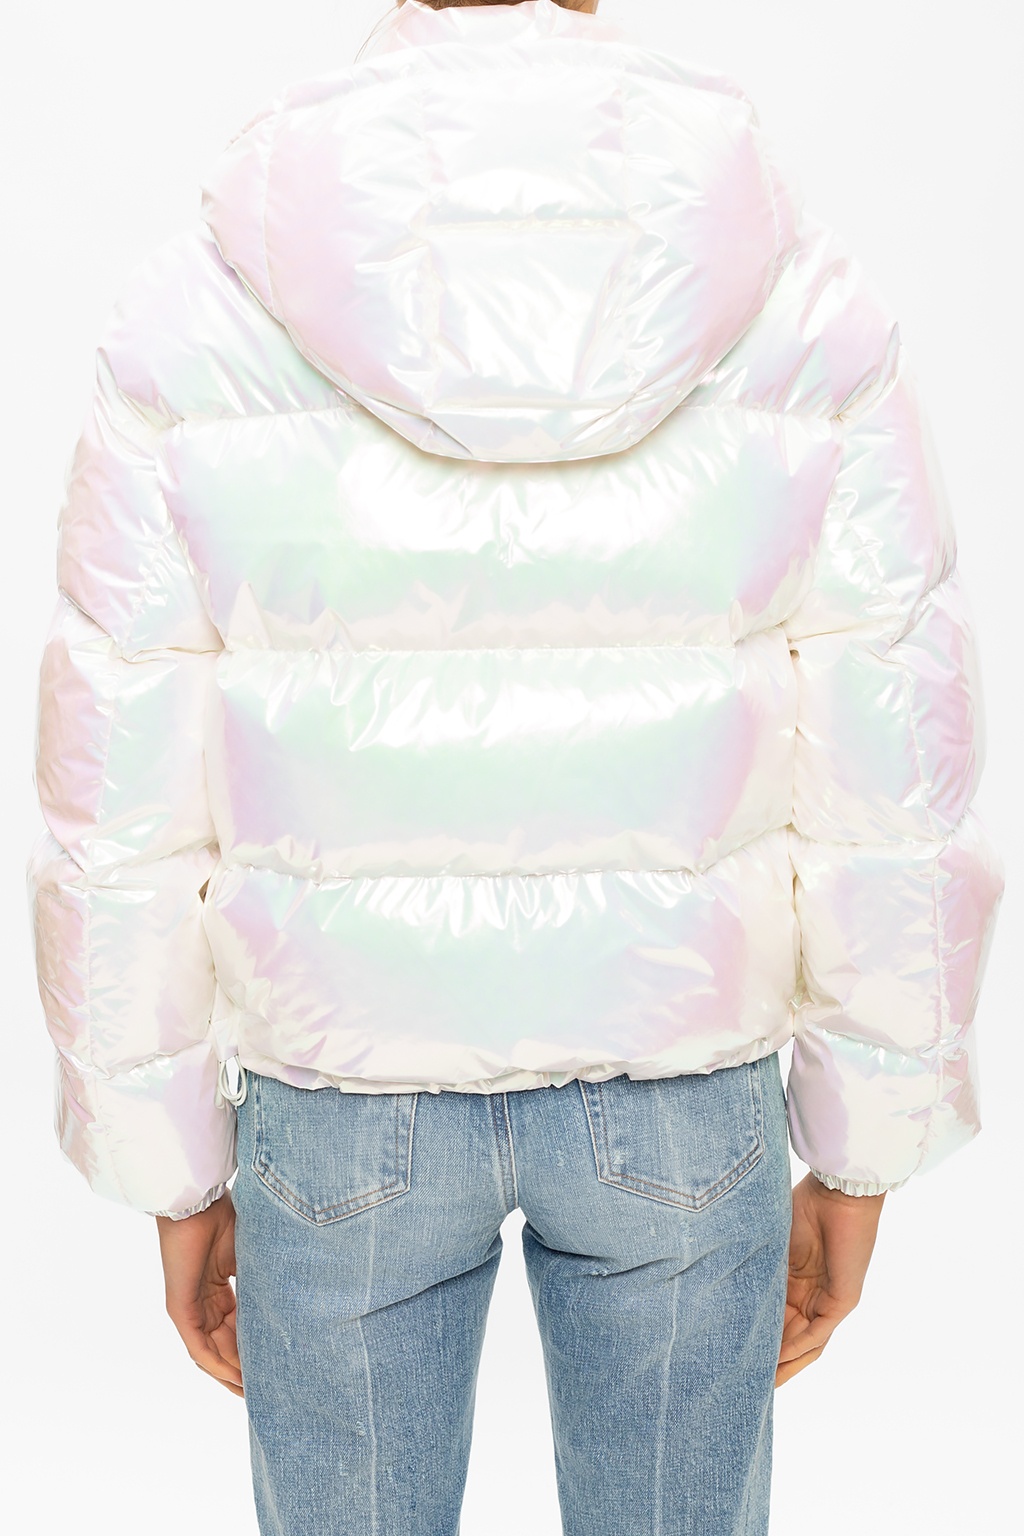 Moncler ‘Daos’ hooded down jacket